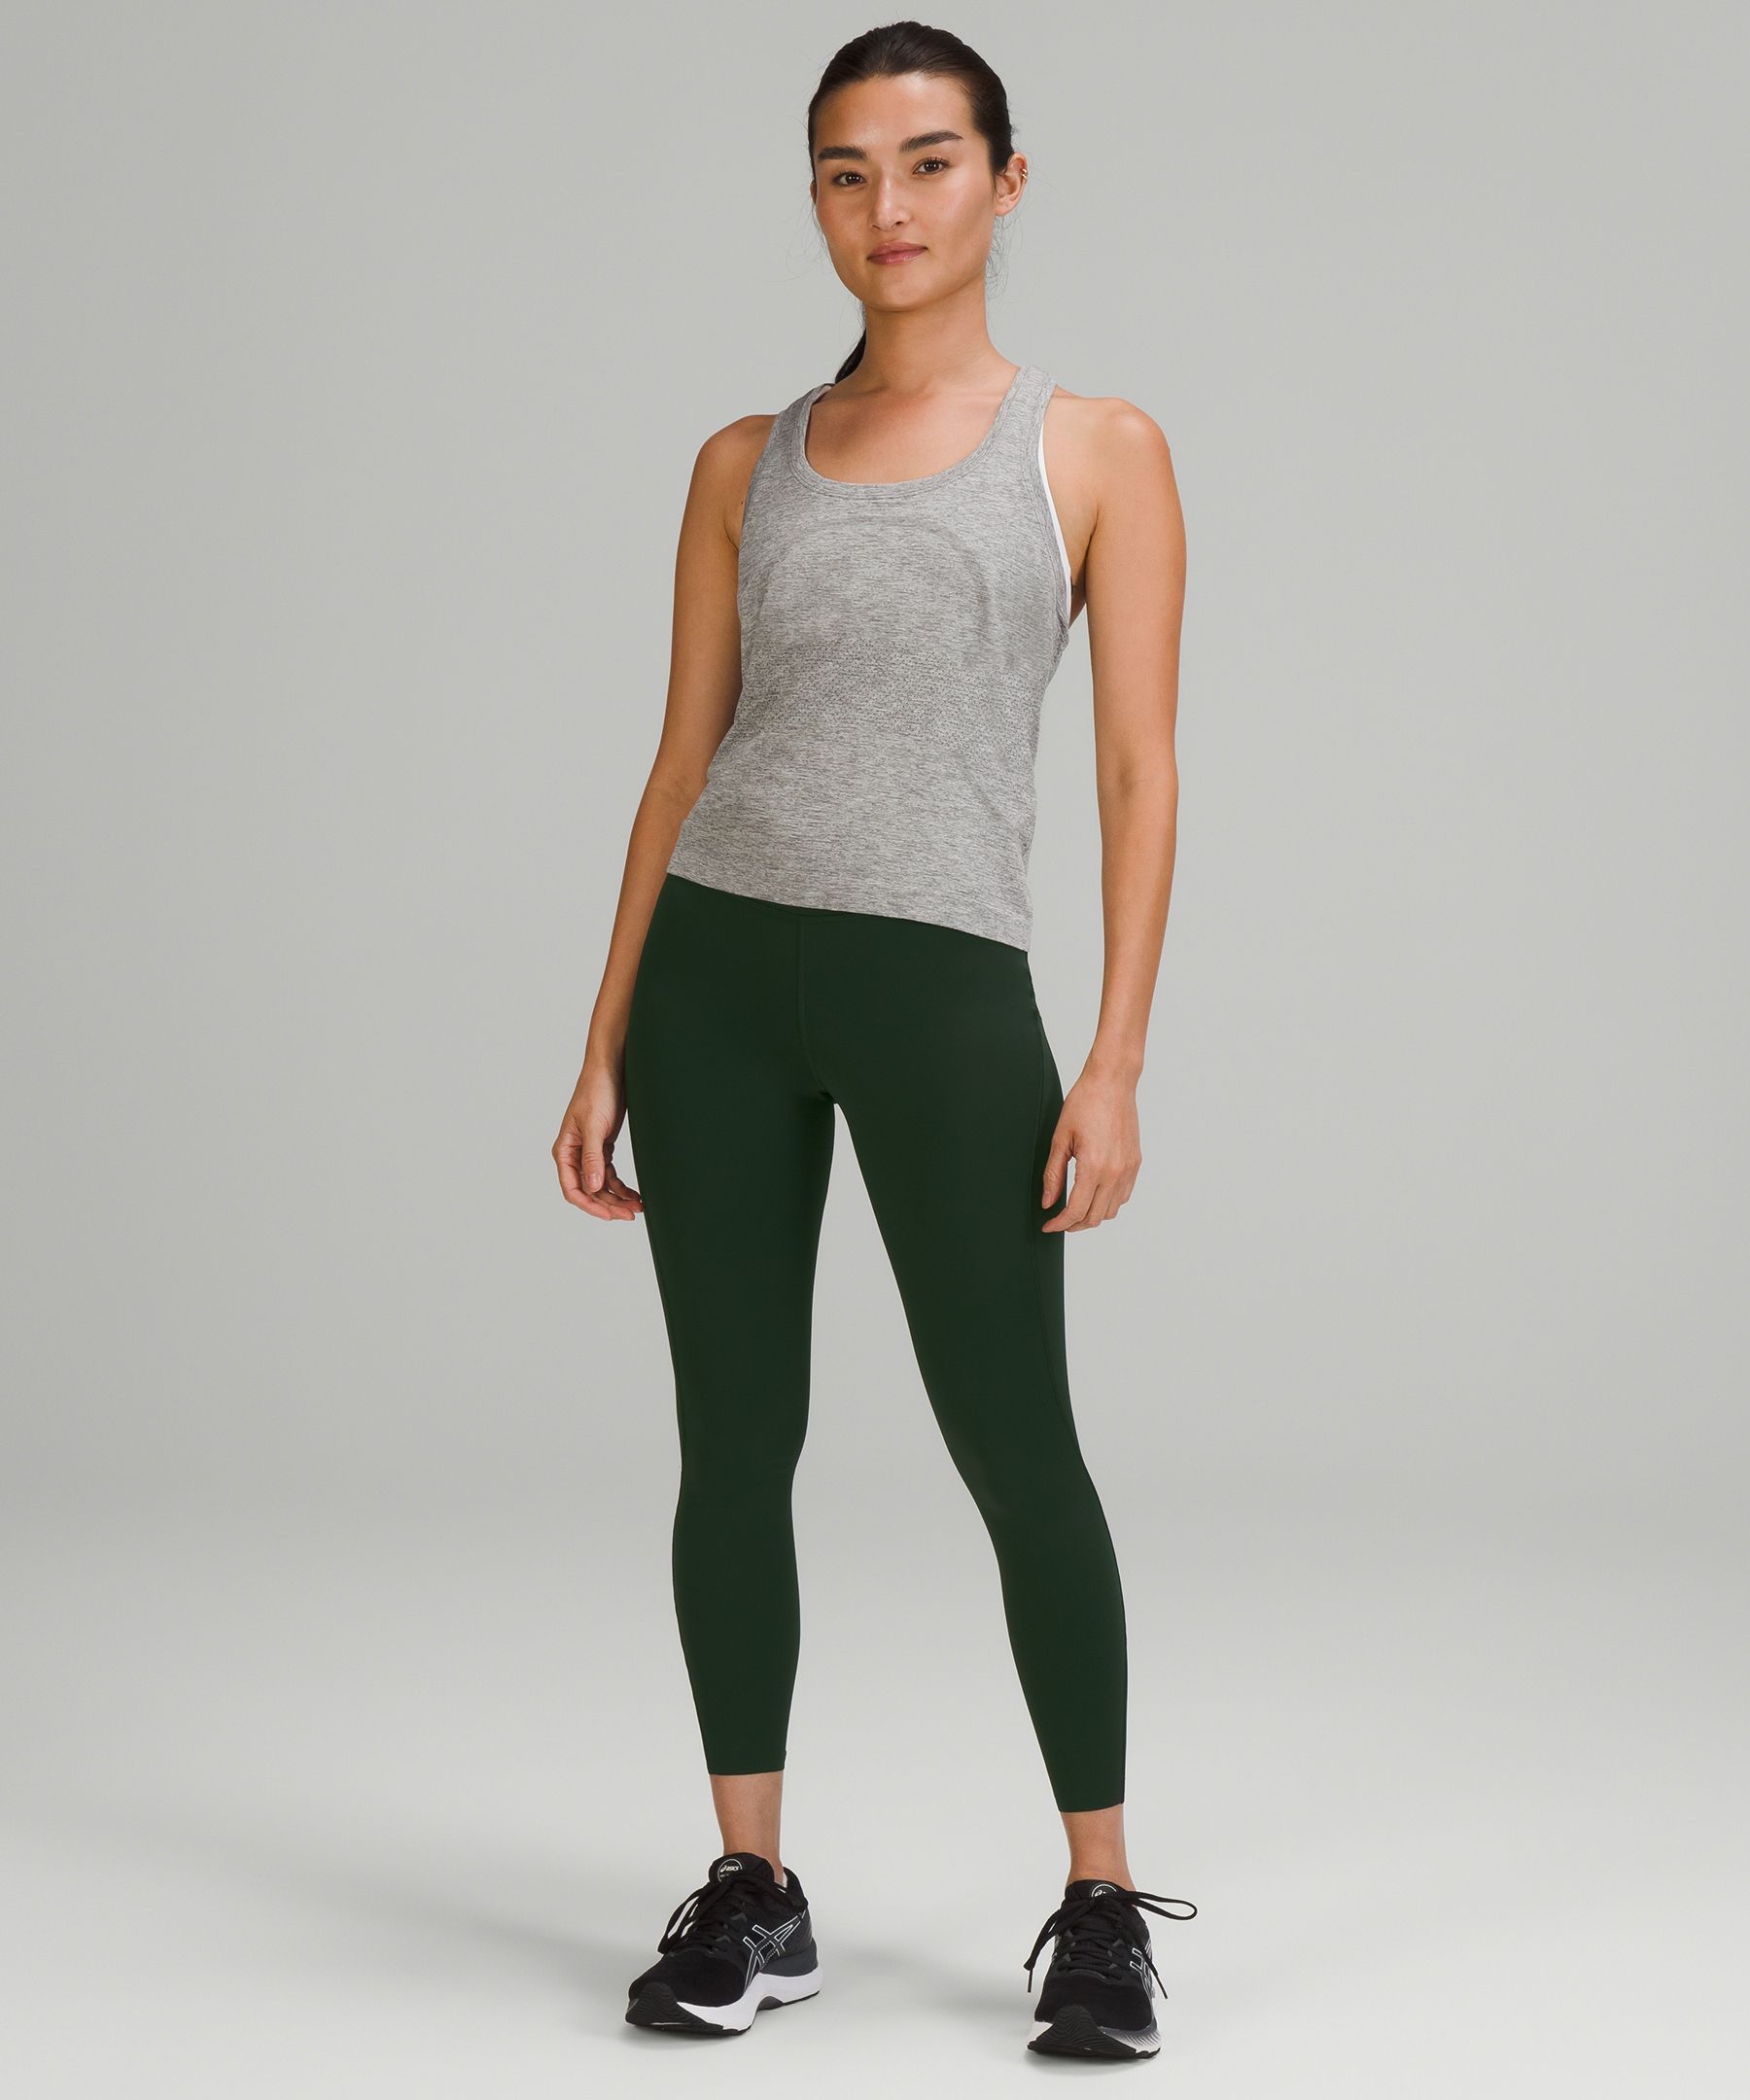 Lululemon Base Pace High Rise running tights in True Navy, Women's